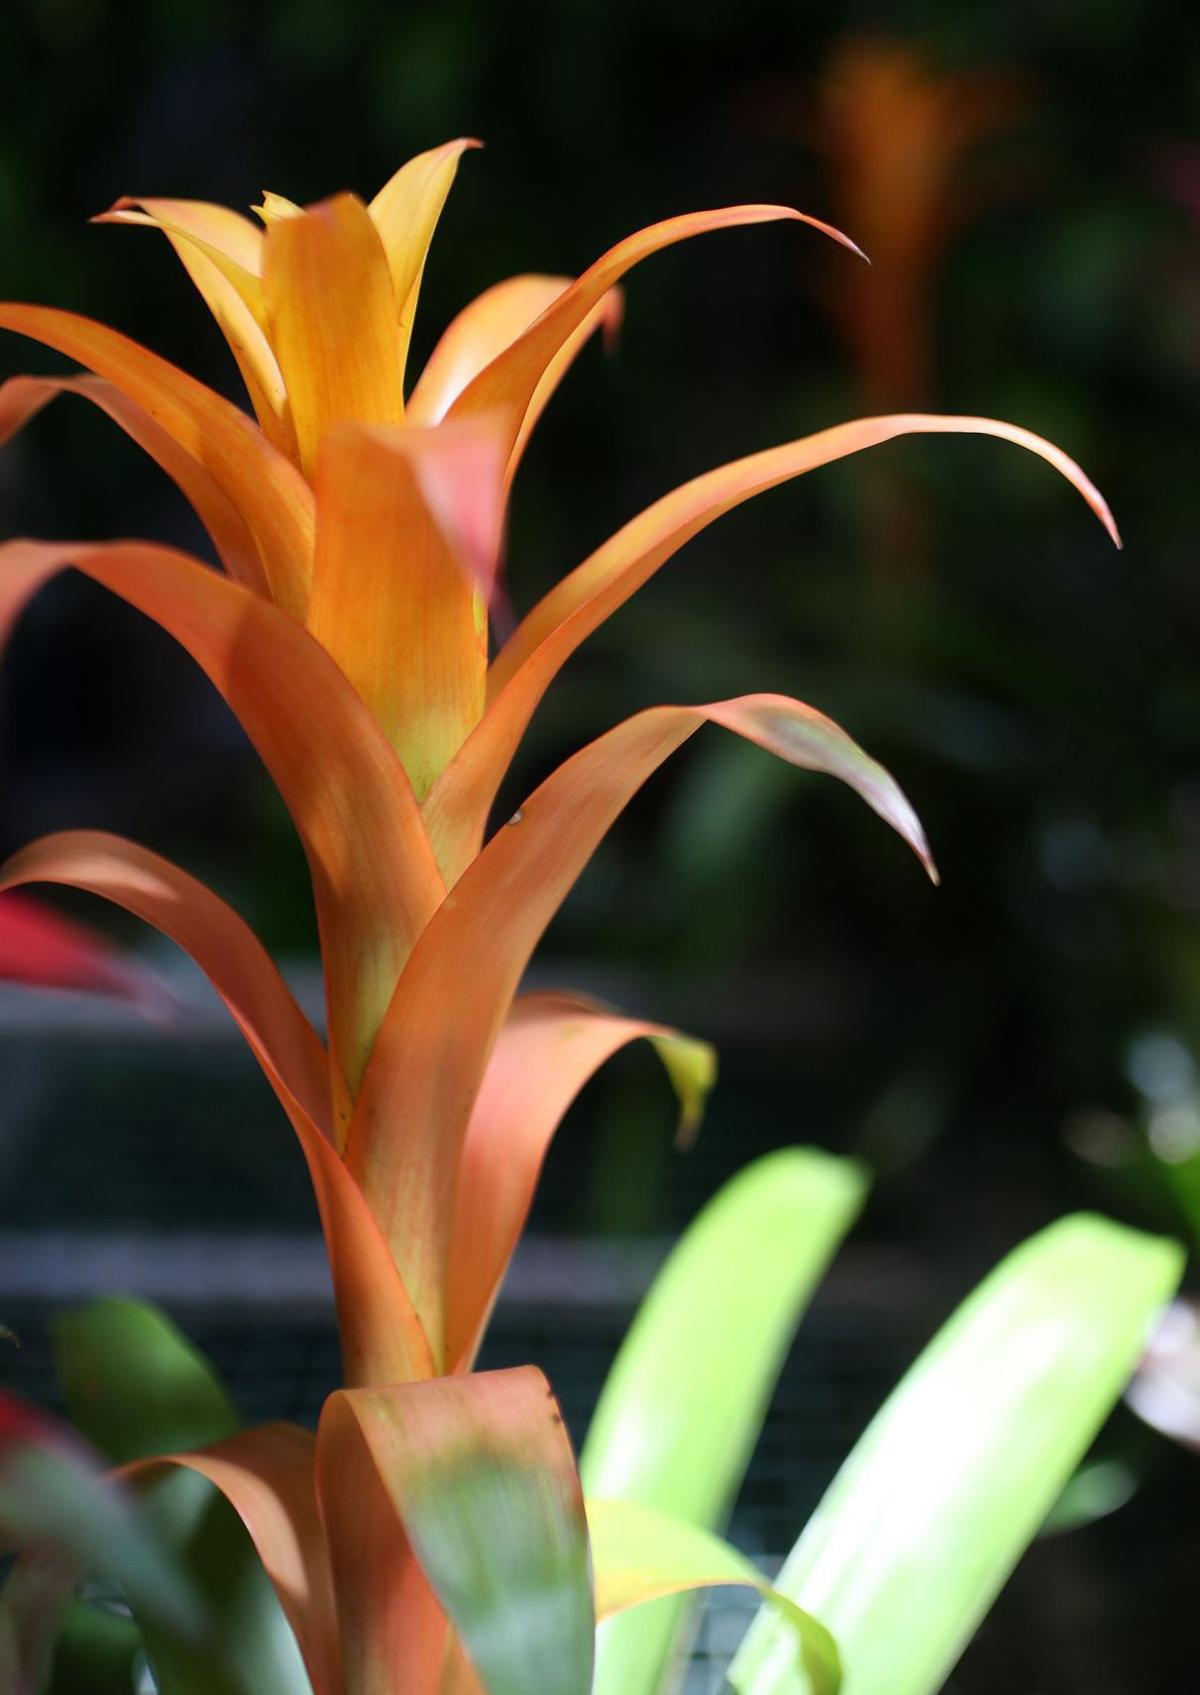 Tropical plants offer color, texture and design for indoor ...